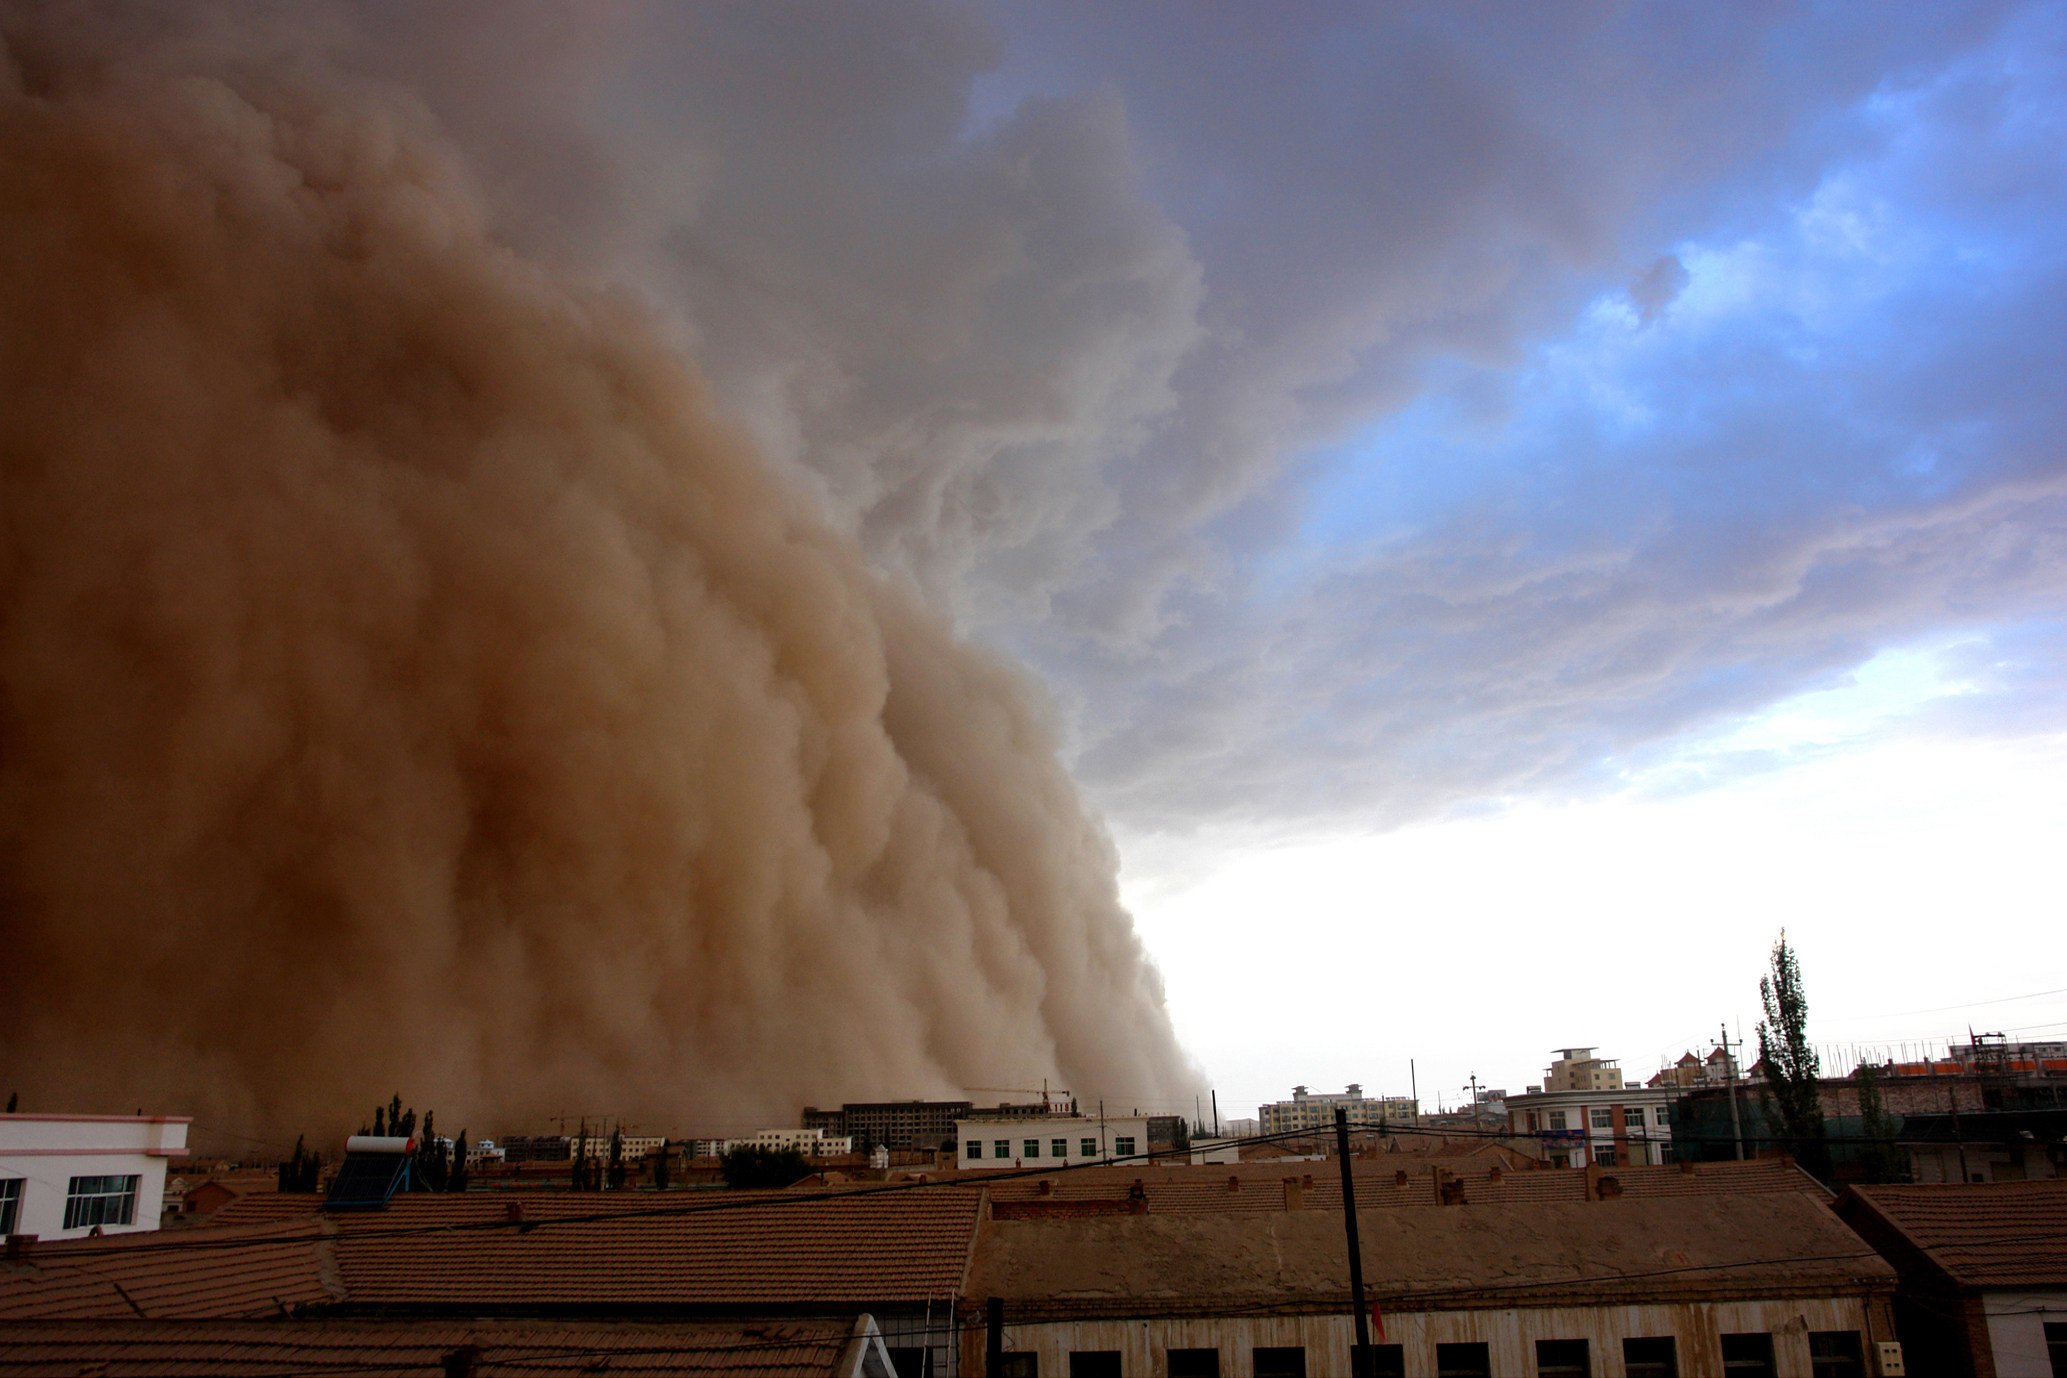 Sandstorms, like this one in Inner Mongolia, regularly blow across the border into China. But the main factor causing them might have less to do with Mongolia’s environment and more to do with wind speeds. Photo: Xinhua